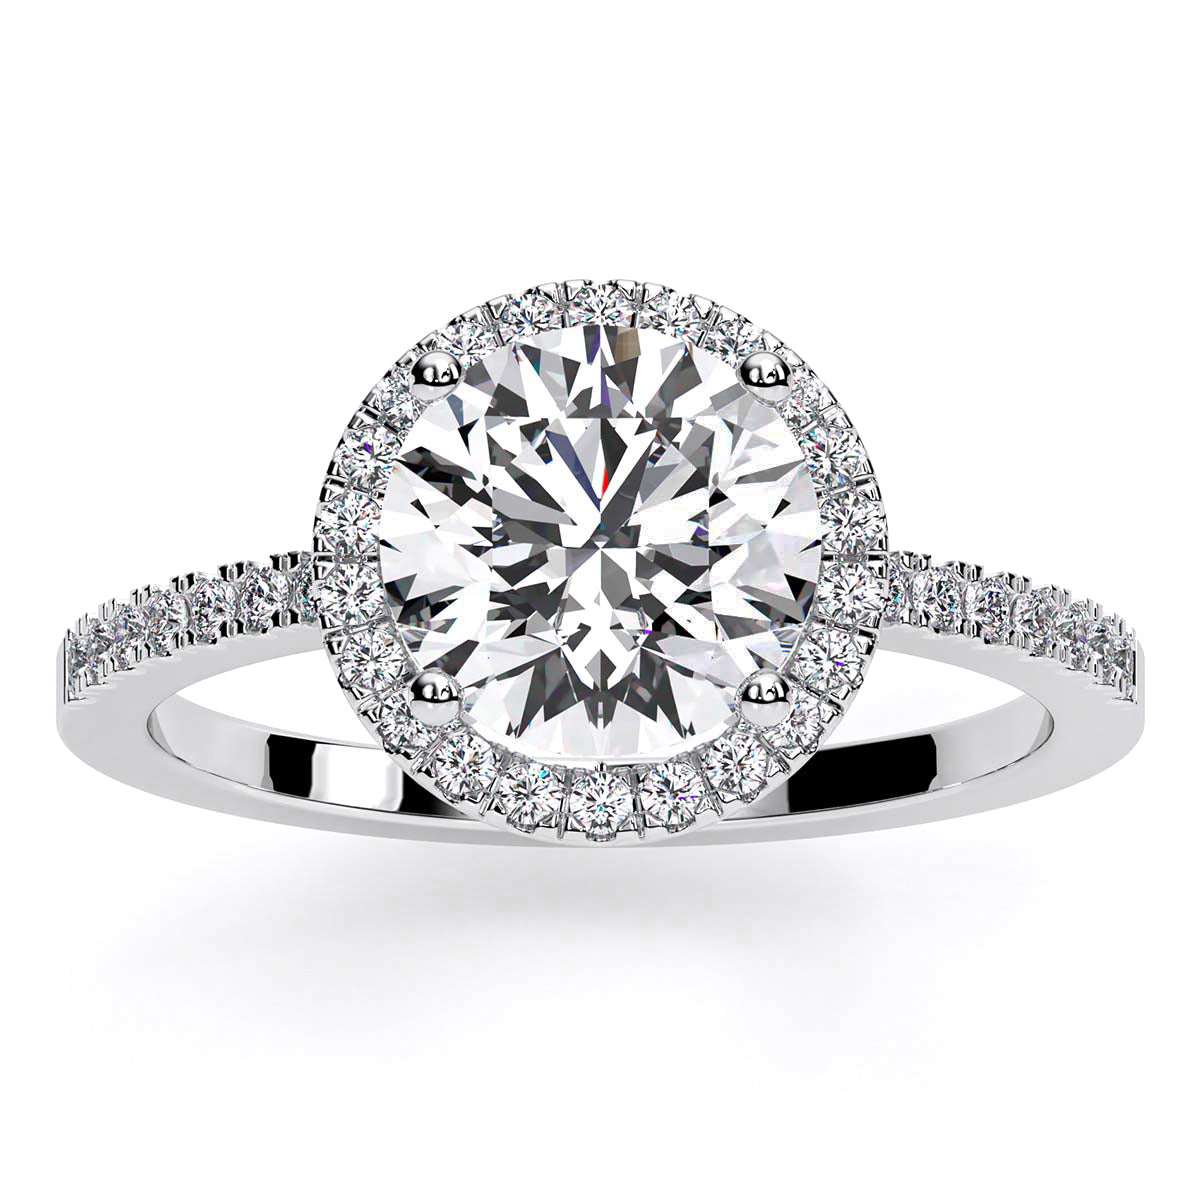 Daily Deal: 2.37ct Total Weight Round Lab Diamond Engagement Ring